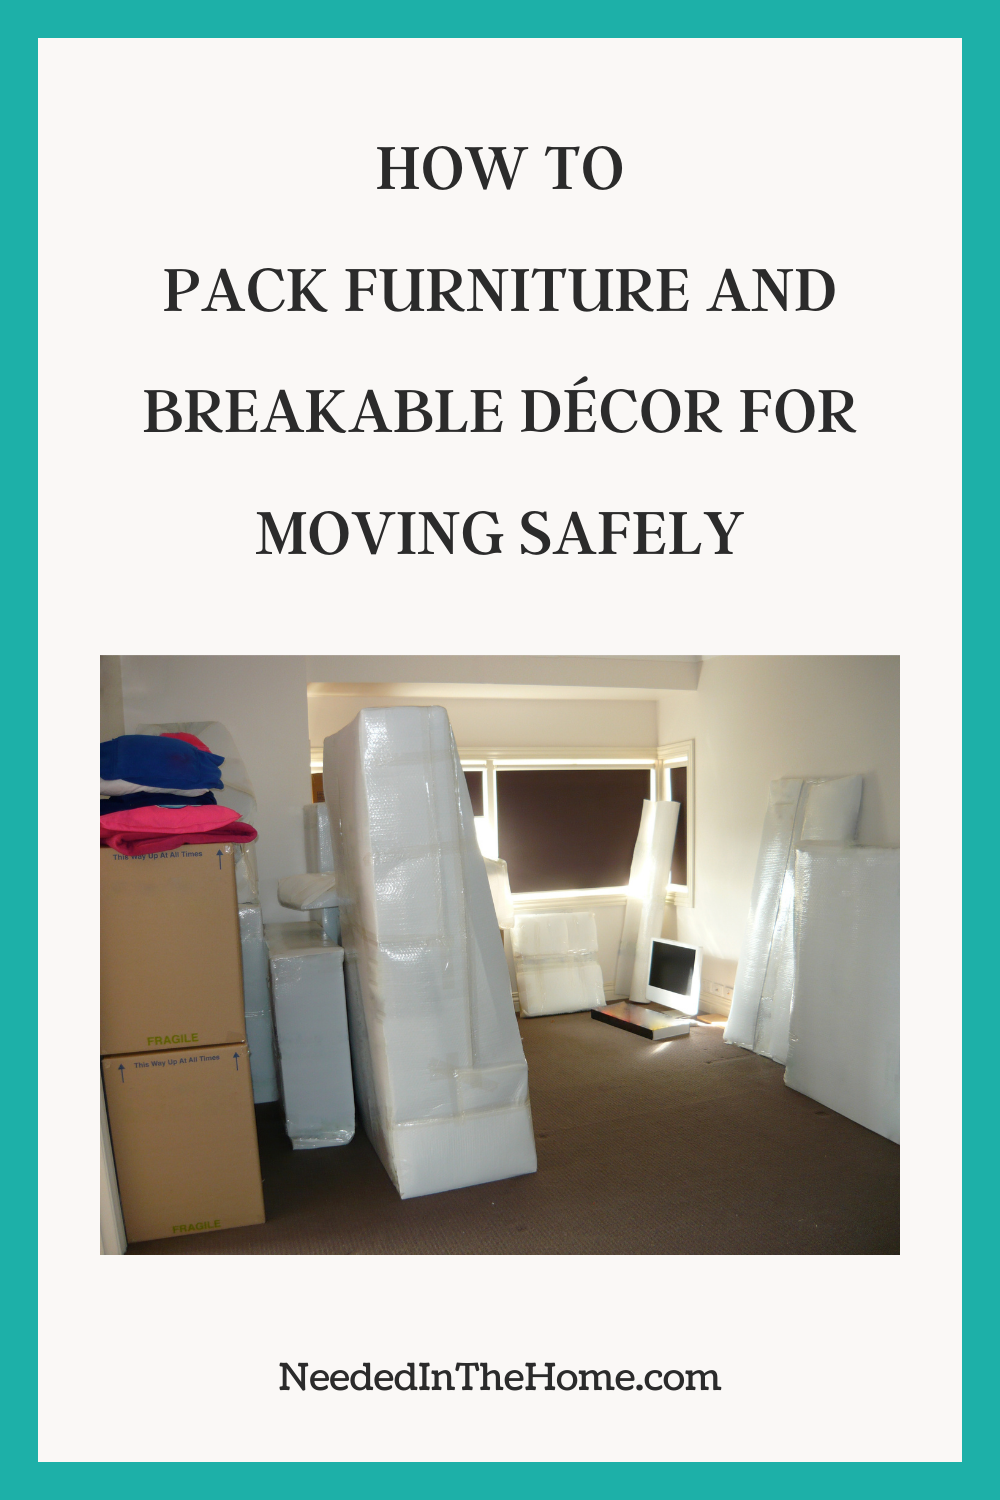 pinterest-pin-description how to pack furniture and breakable decor for moving safely image of a room full of wrapped and packed items neededinthehome